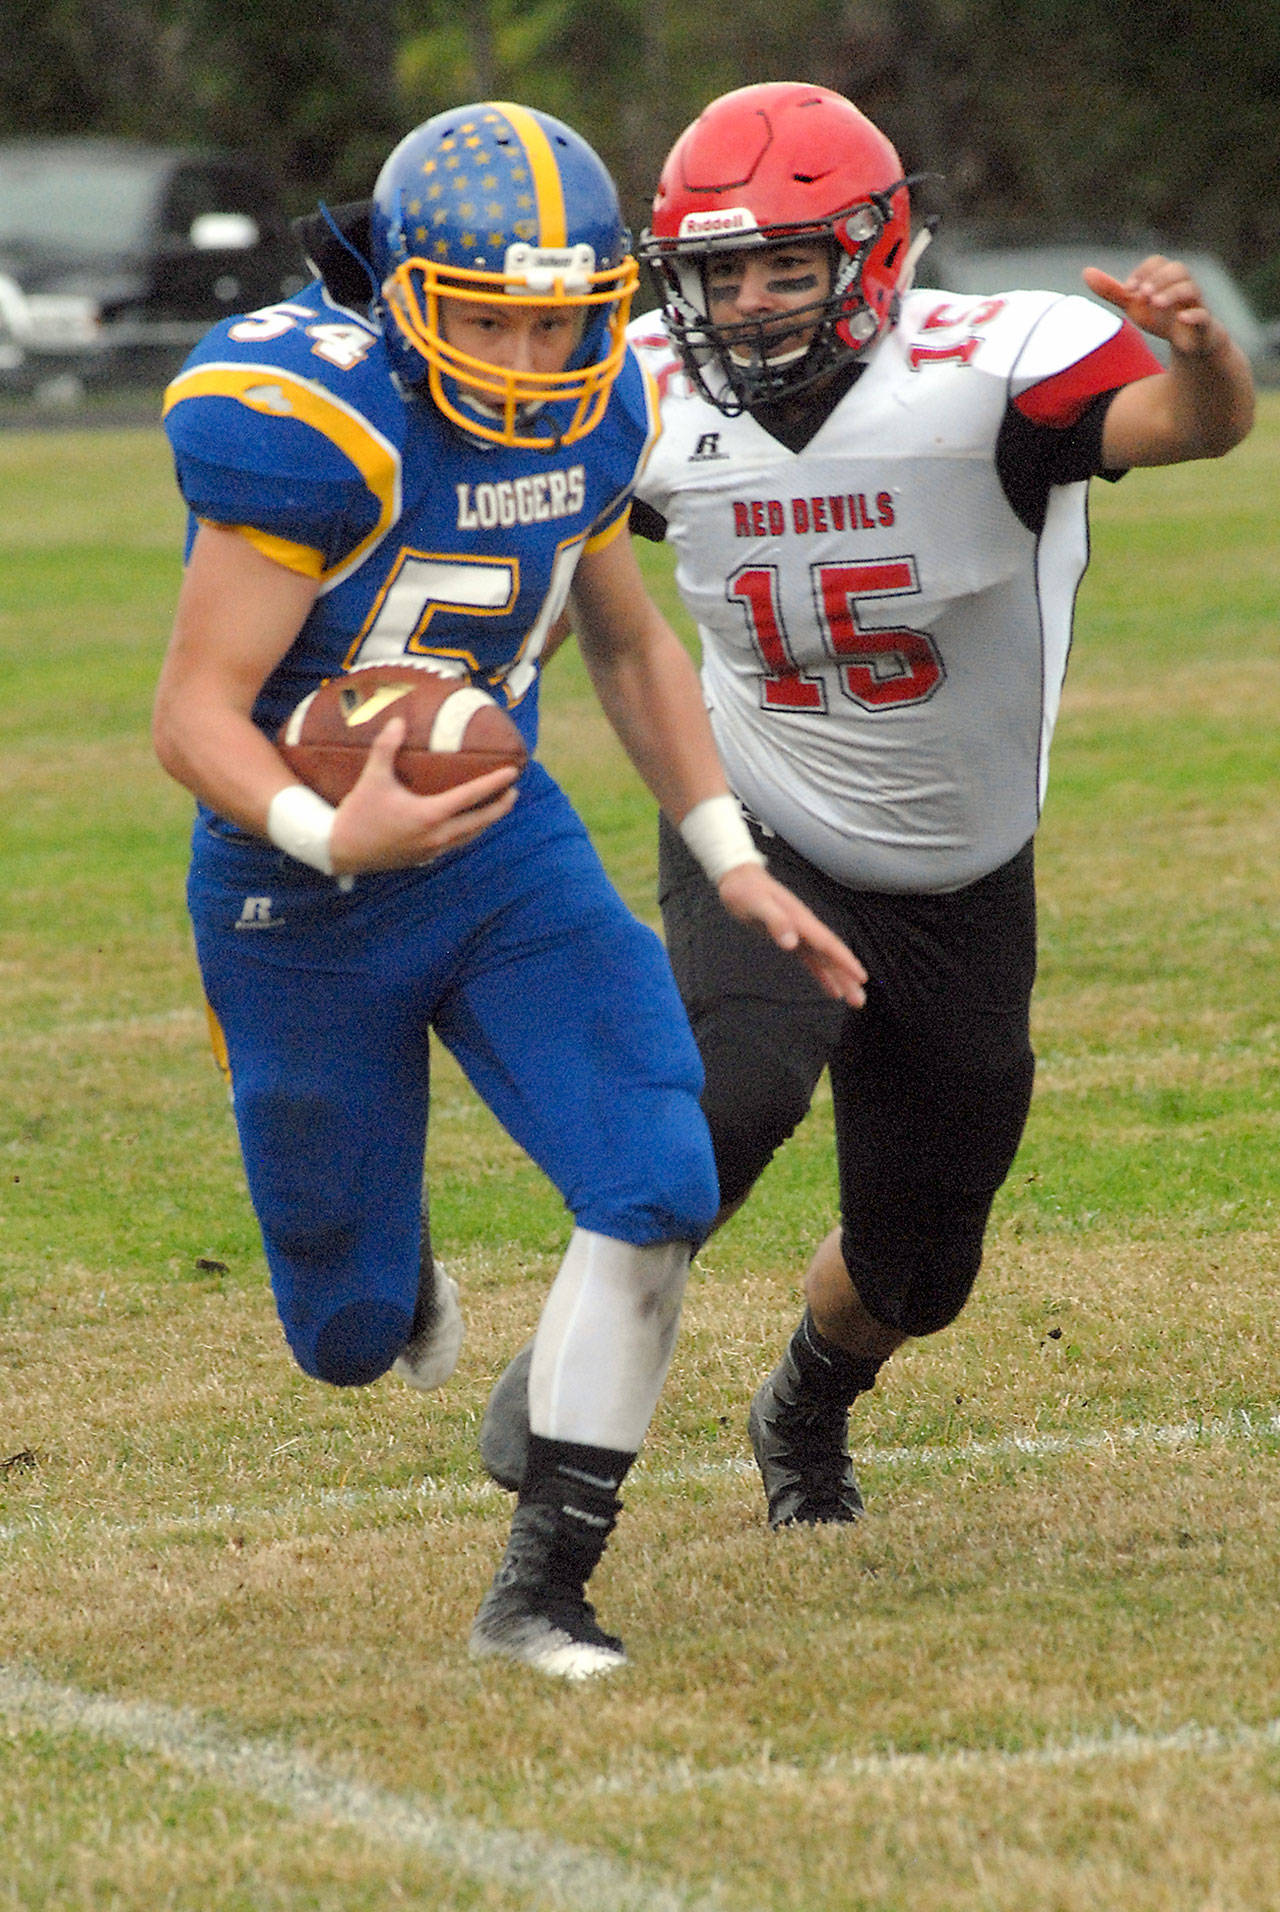 Crescent’s Noah Leonard is pursued by Neah Bay’s Joseph Yallup in a game played on Sept. 30 in Joyce.                                Keith Thorpe/Peninsula Daily News